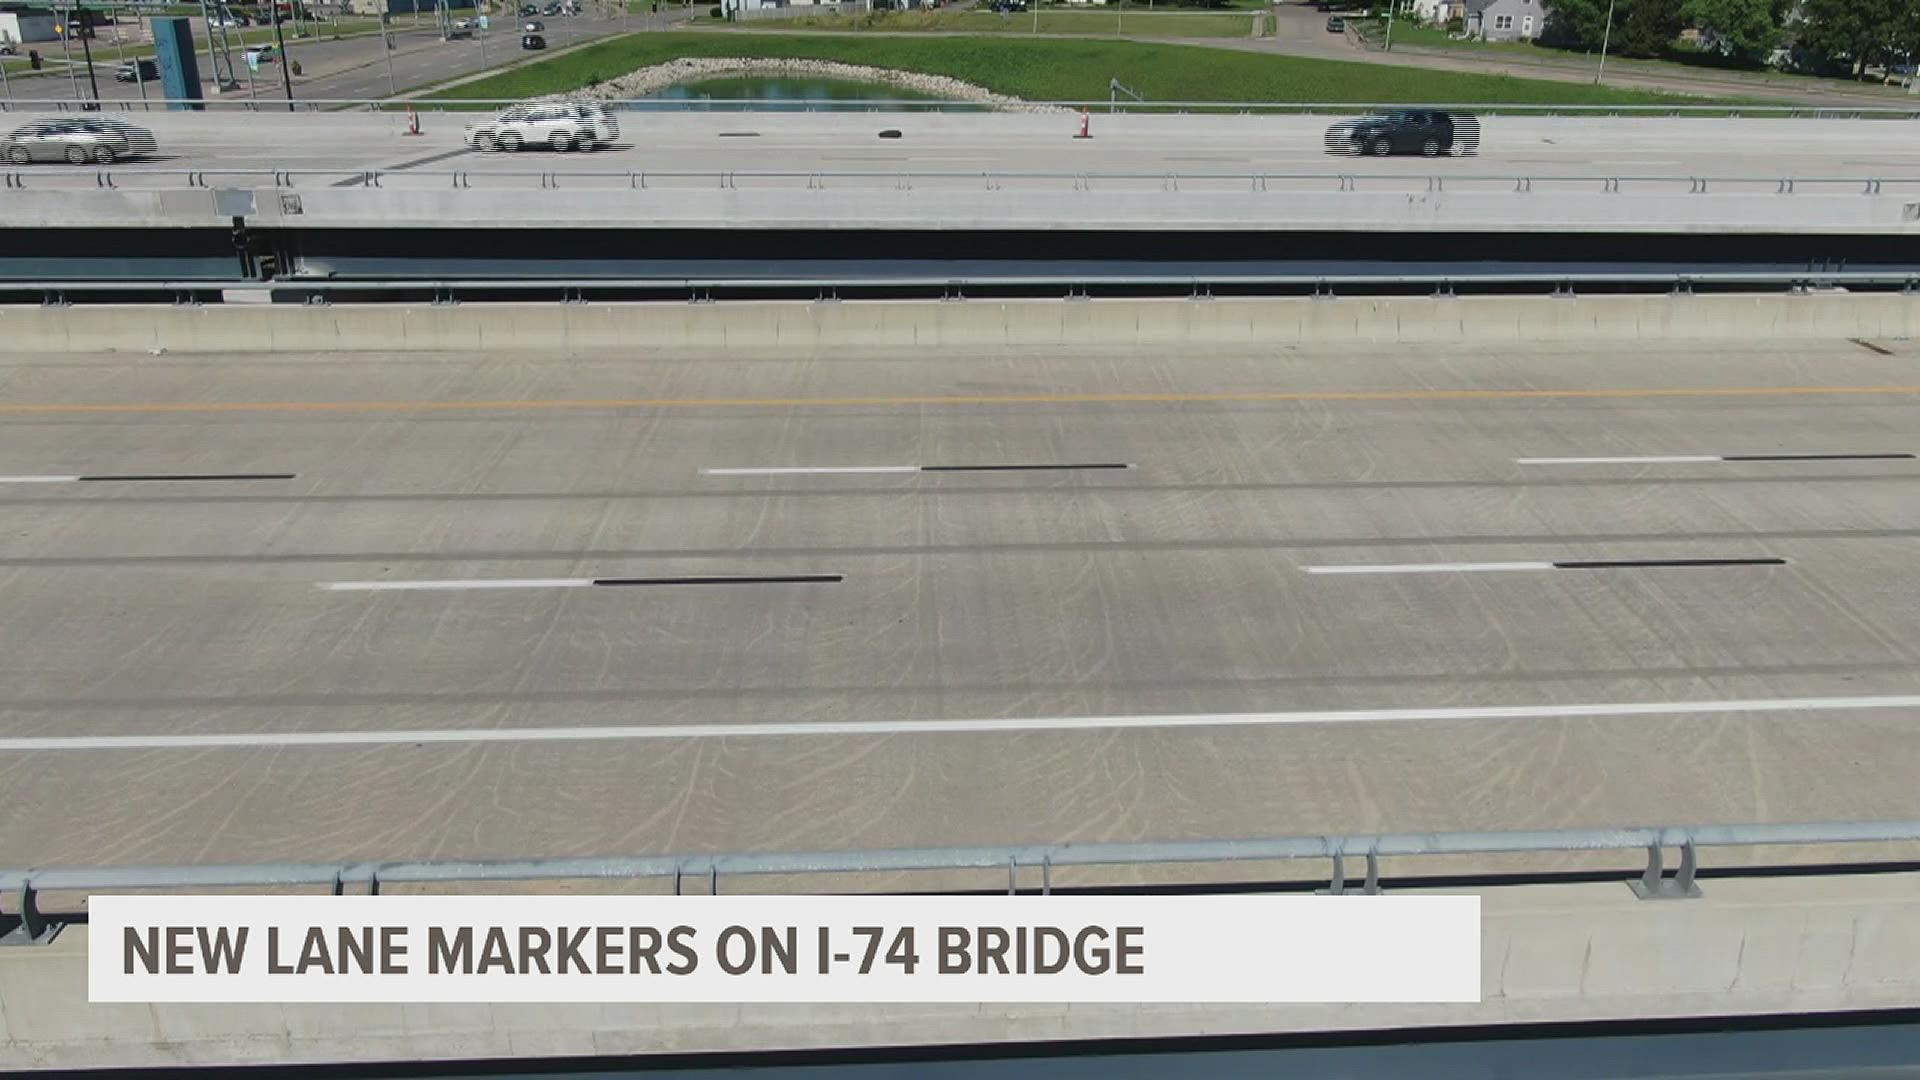 You might have seen some new lines on the I-74 Bridge within the last month. Here's what they mean.